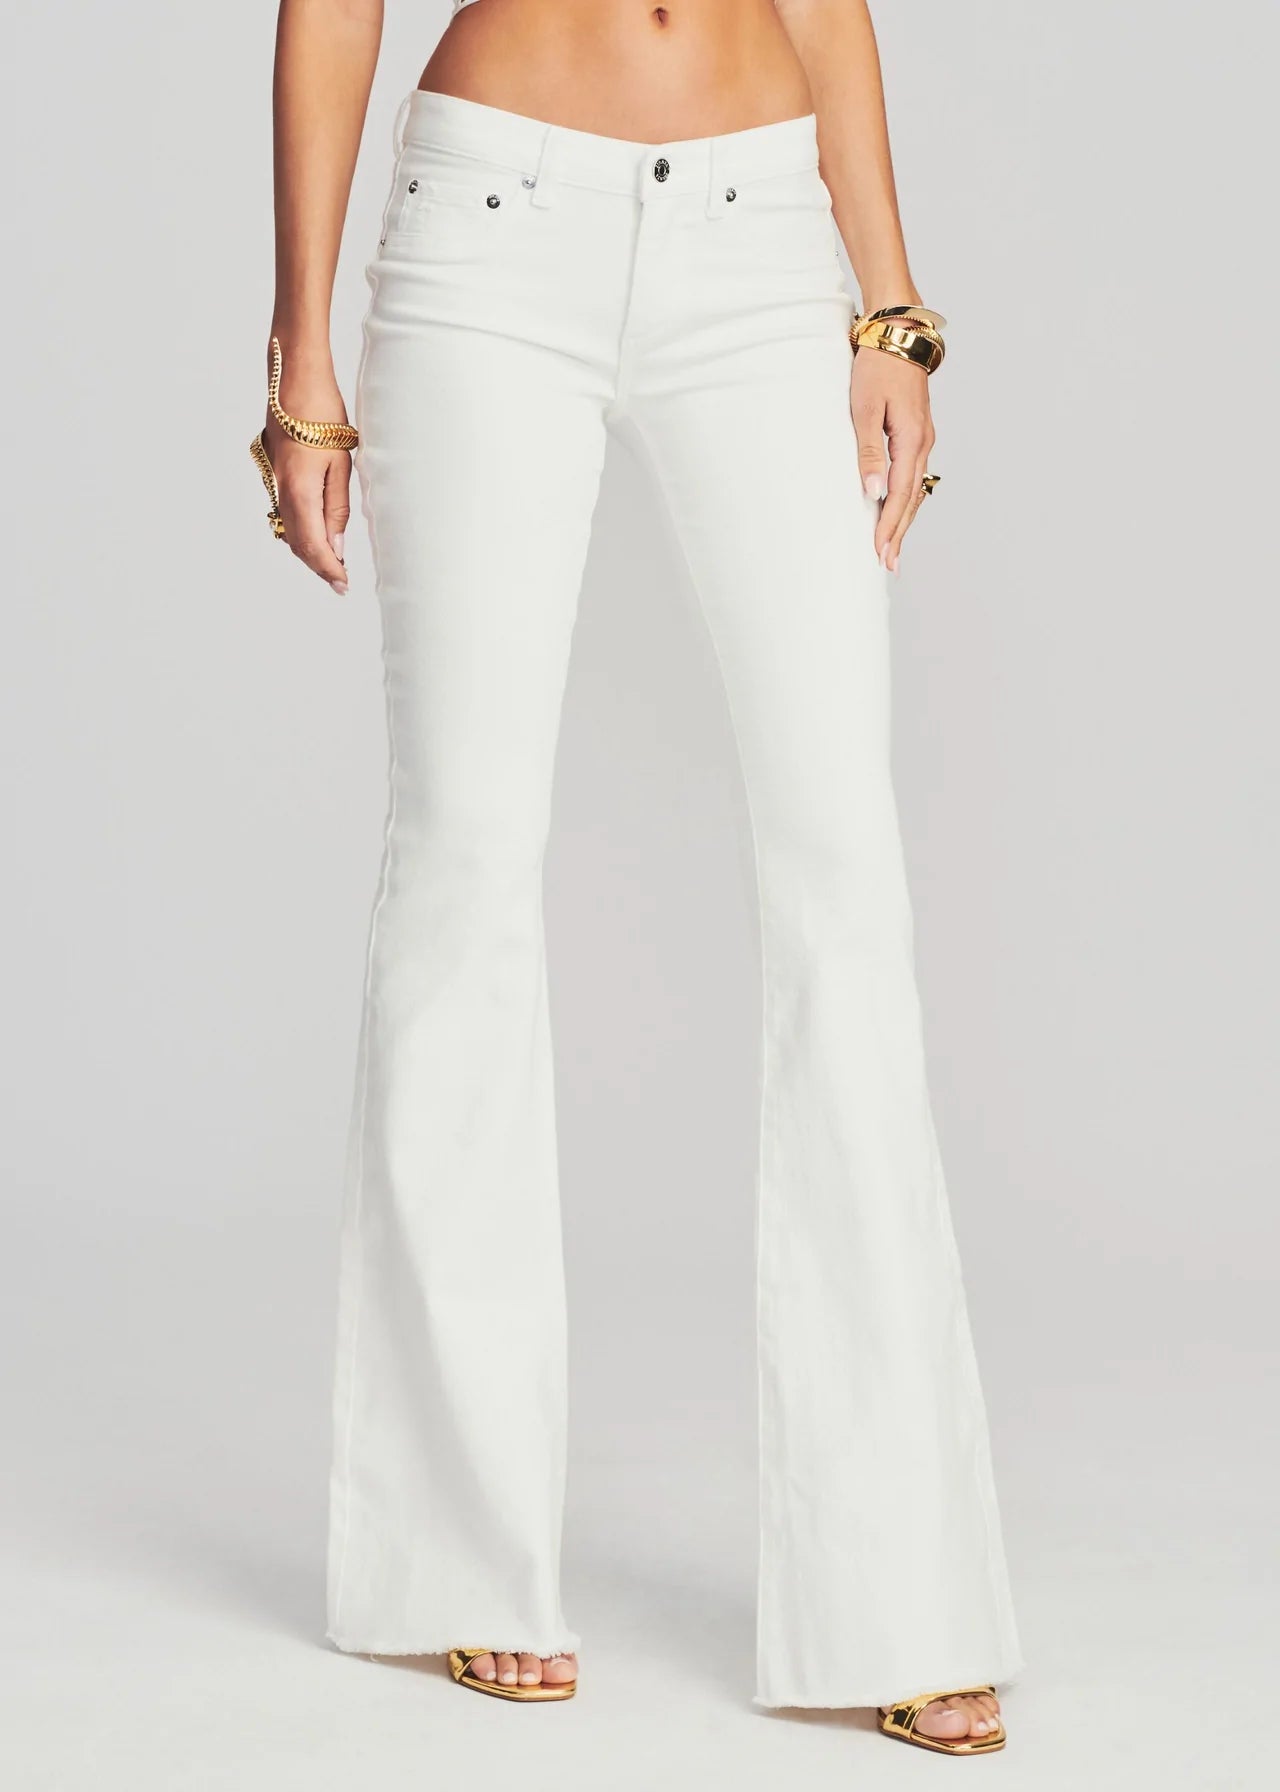 White High Waisted Flared Jeans